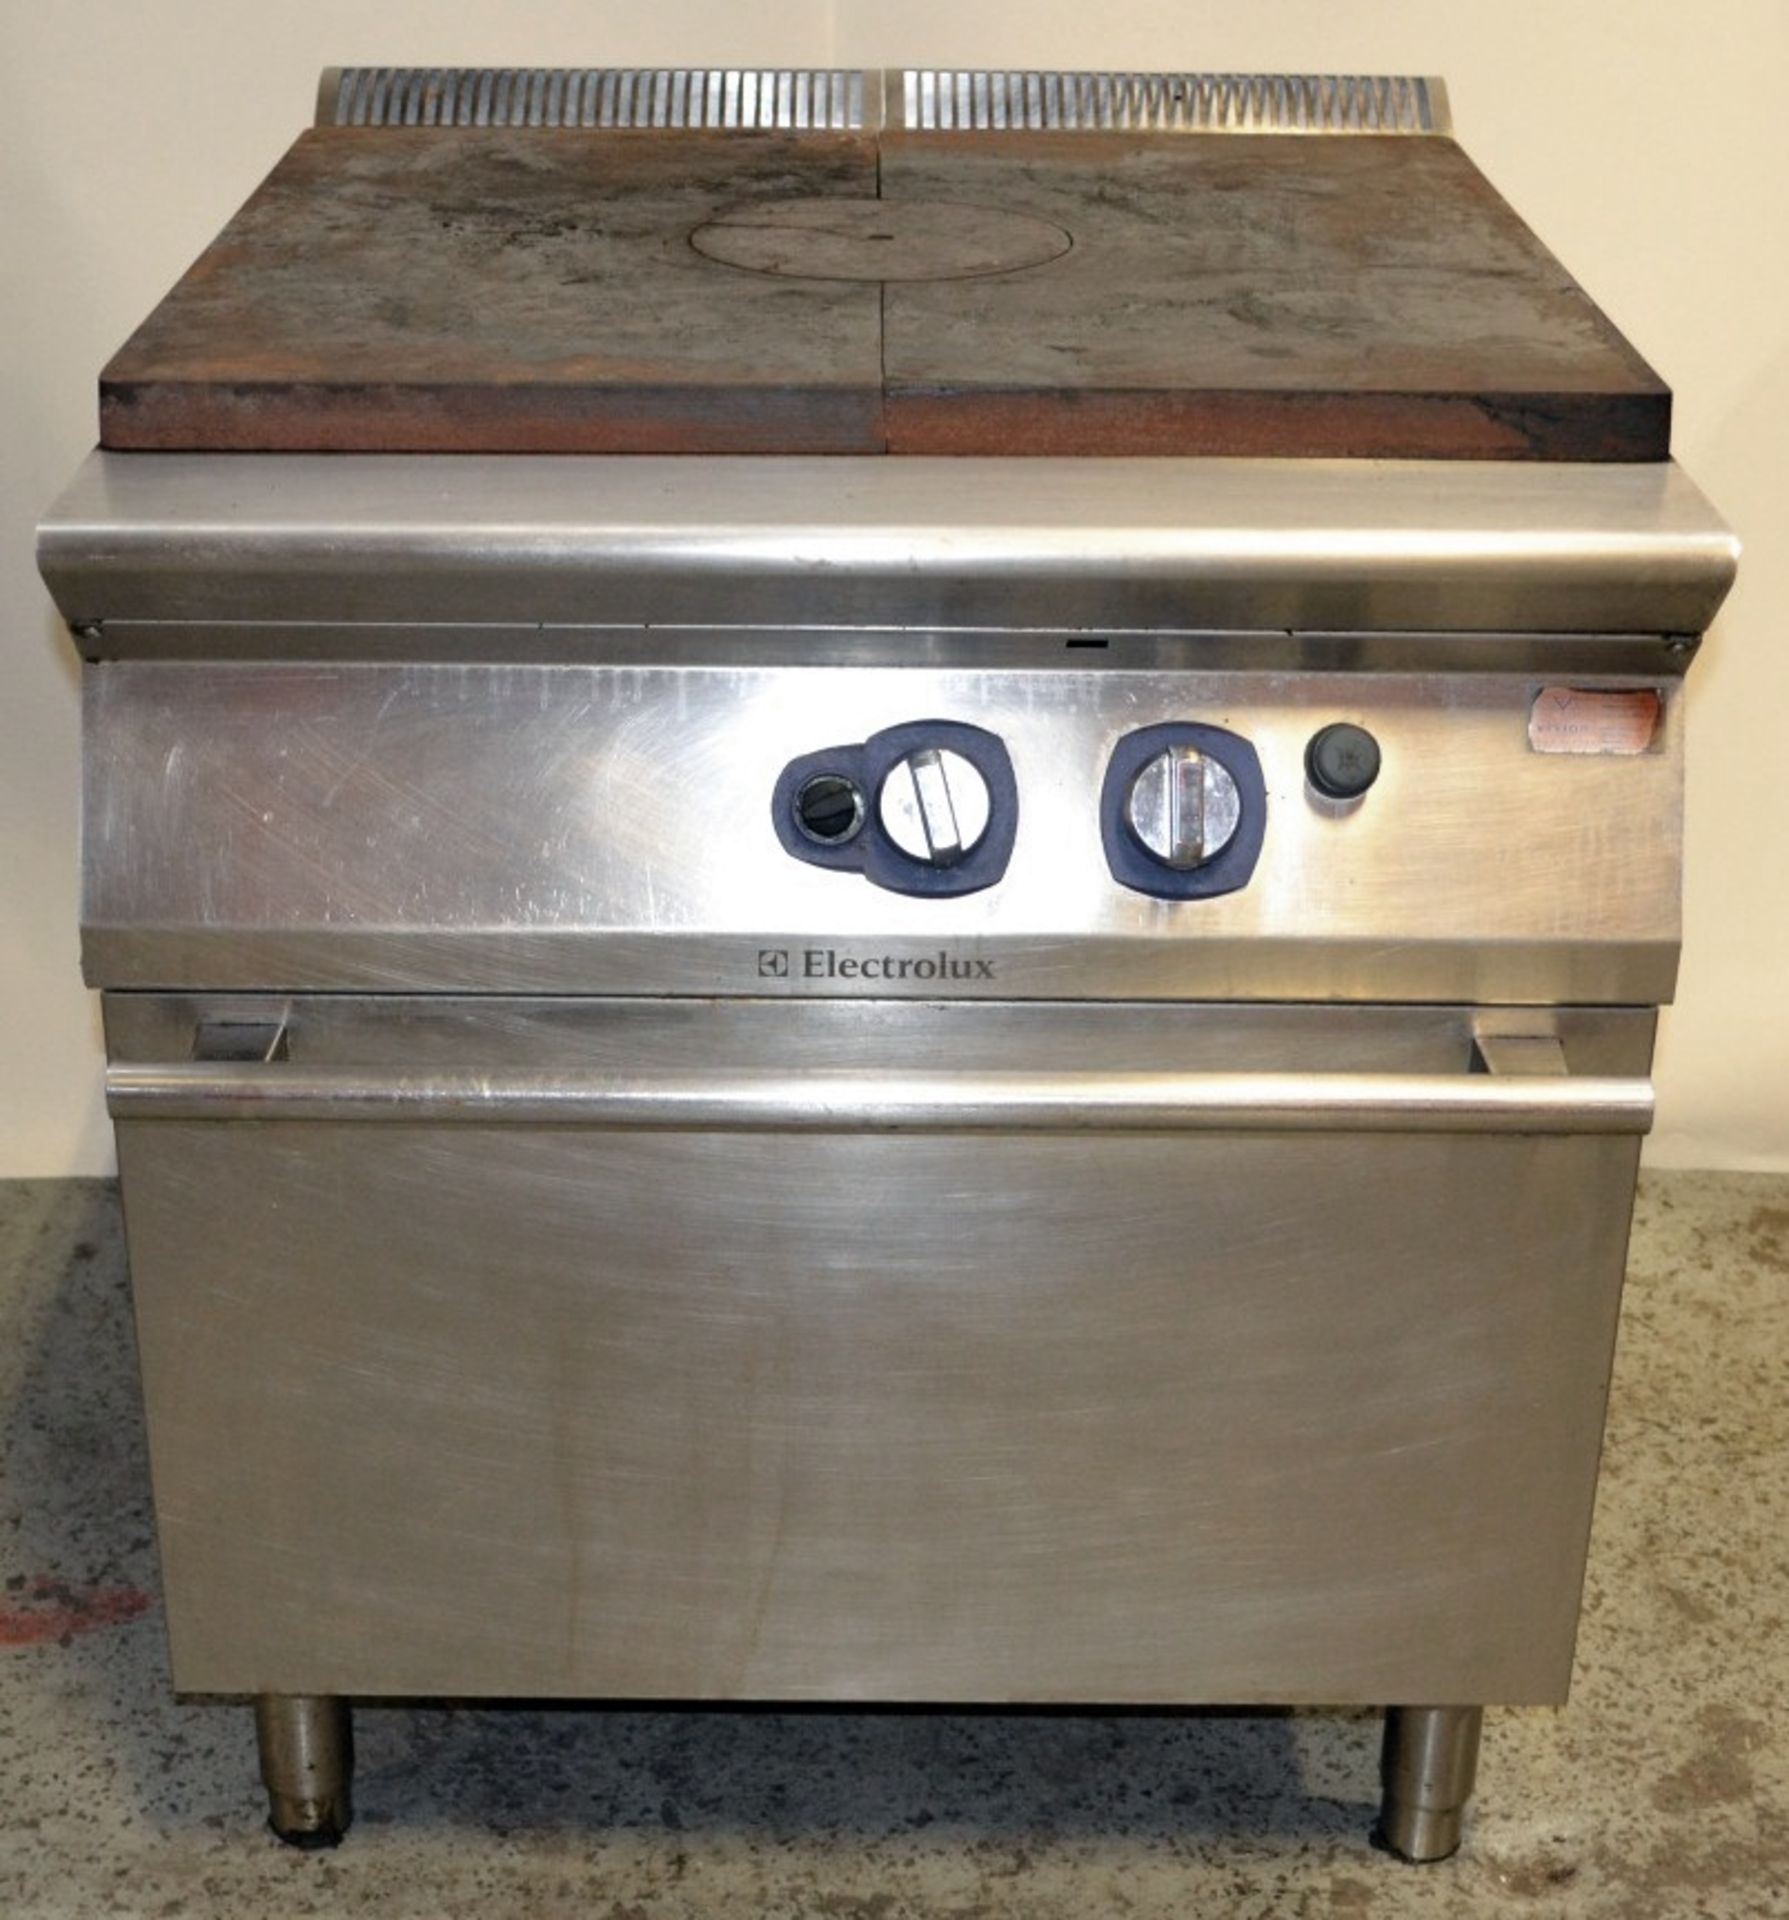 1 x Electrolux Commercial Stainless Steel Solid Top Oven With a Durable Cast-iron Cooking